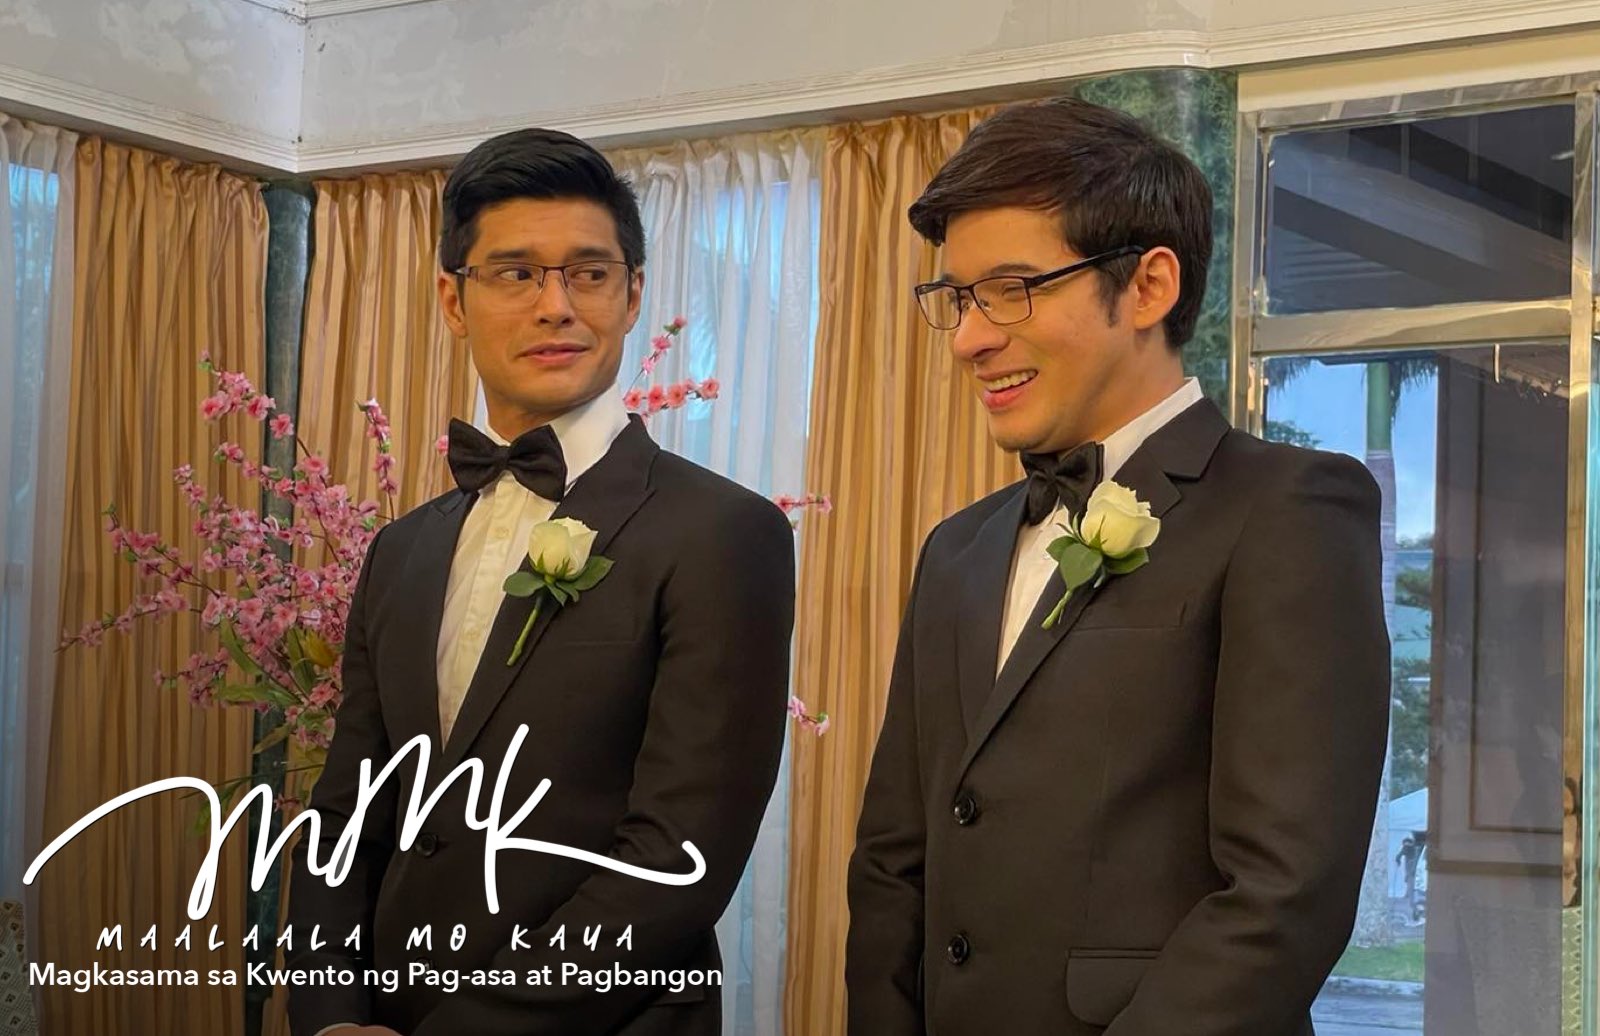 JC, falls in love with Christian in "MMK"